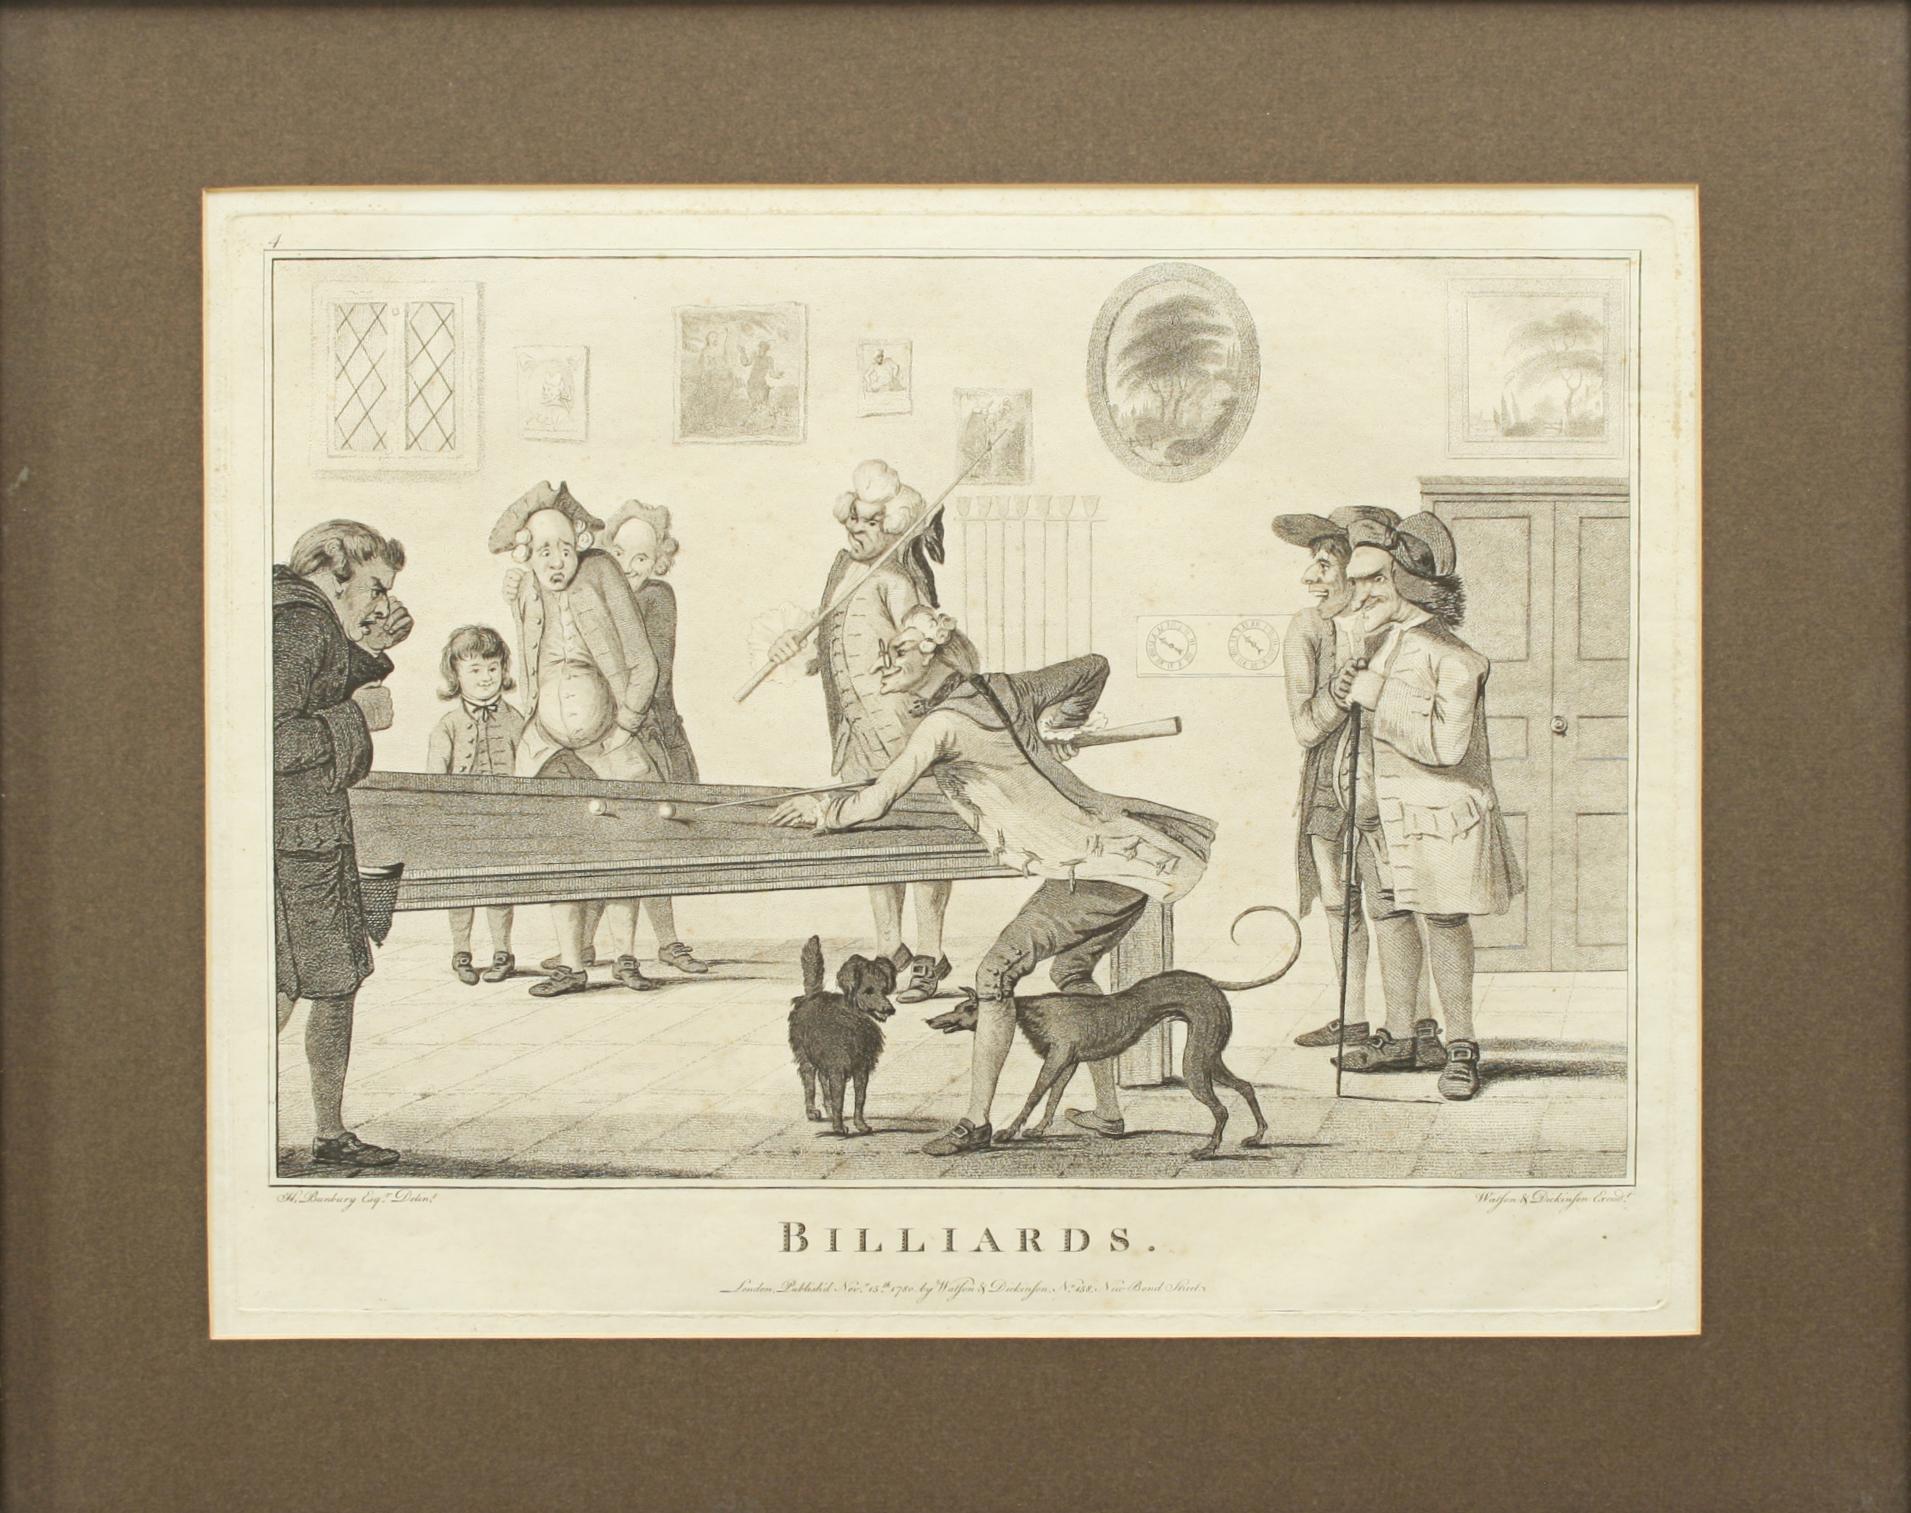 Sporting Art Antique Billiard engraving after Henry Bunbury, Ideal Snooker, Pool Room Picture